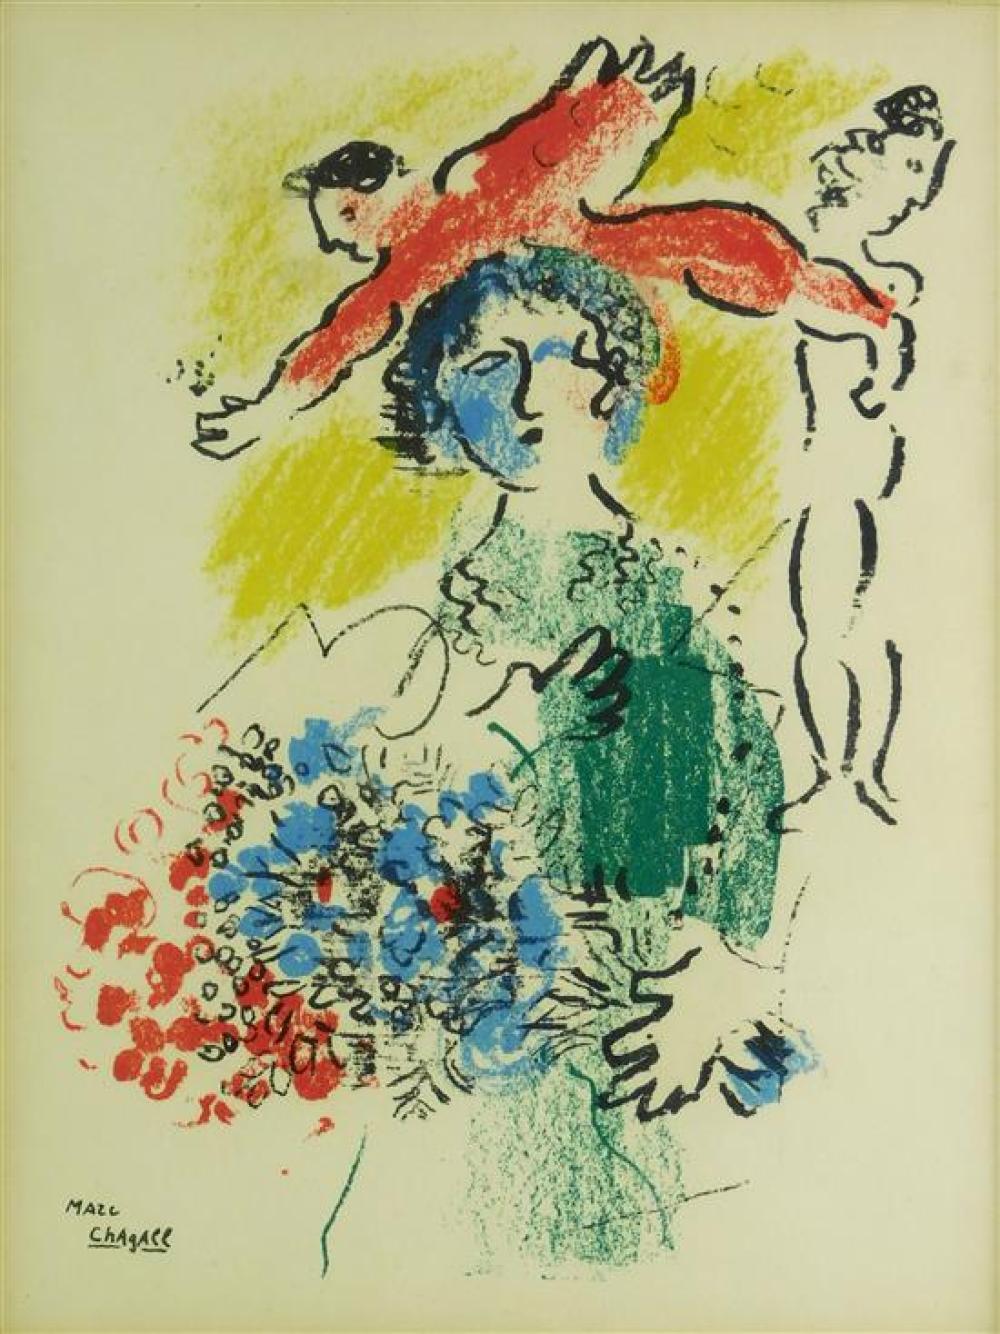 MARC CHAGALL (RUSSIA/FRANCE) 1887-